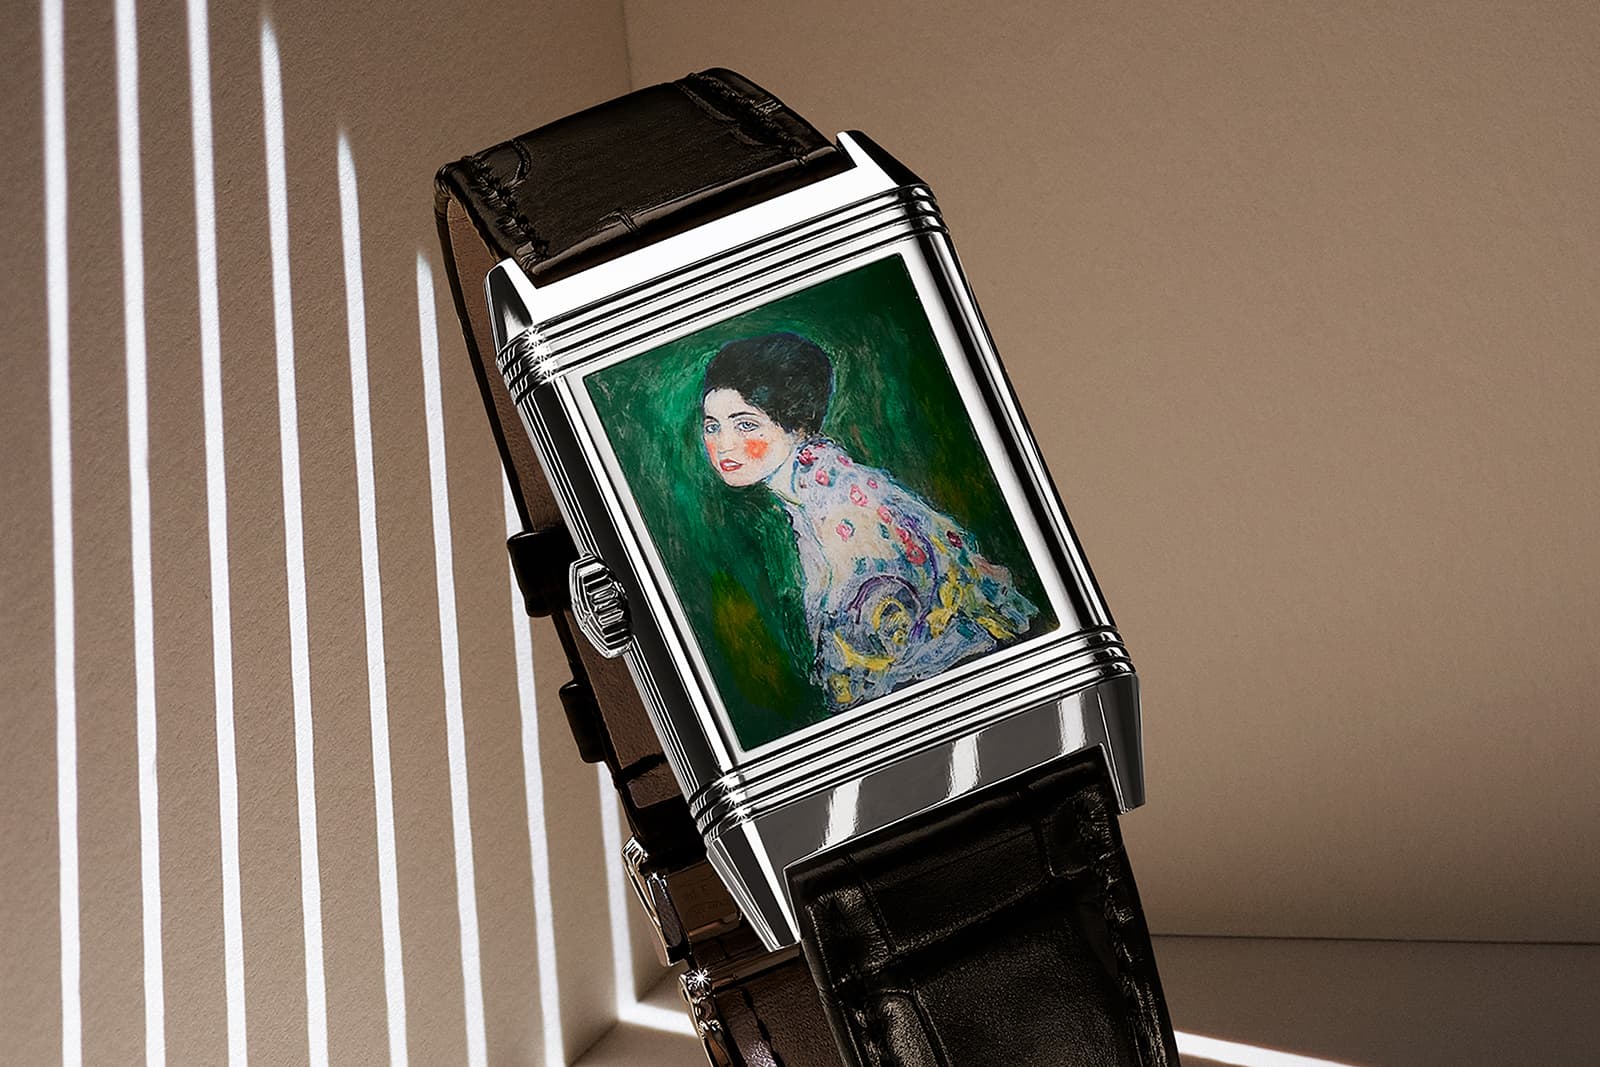 Jaeger-LeCoultre’s master enamellers combined a scaled down version of Gustav Klimt’s ‘Portrait of a Lady’ on the case back with a grand feu enamel dial for this new Reverso Tribute Enamel Hidden Treasures watch